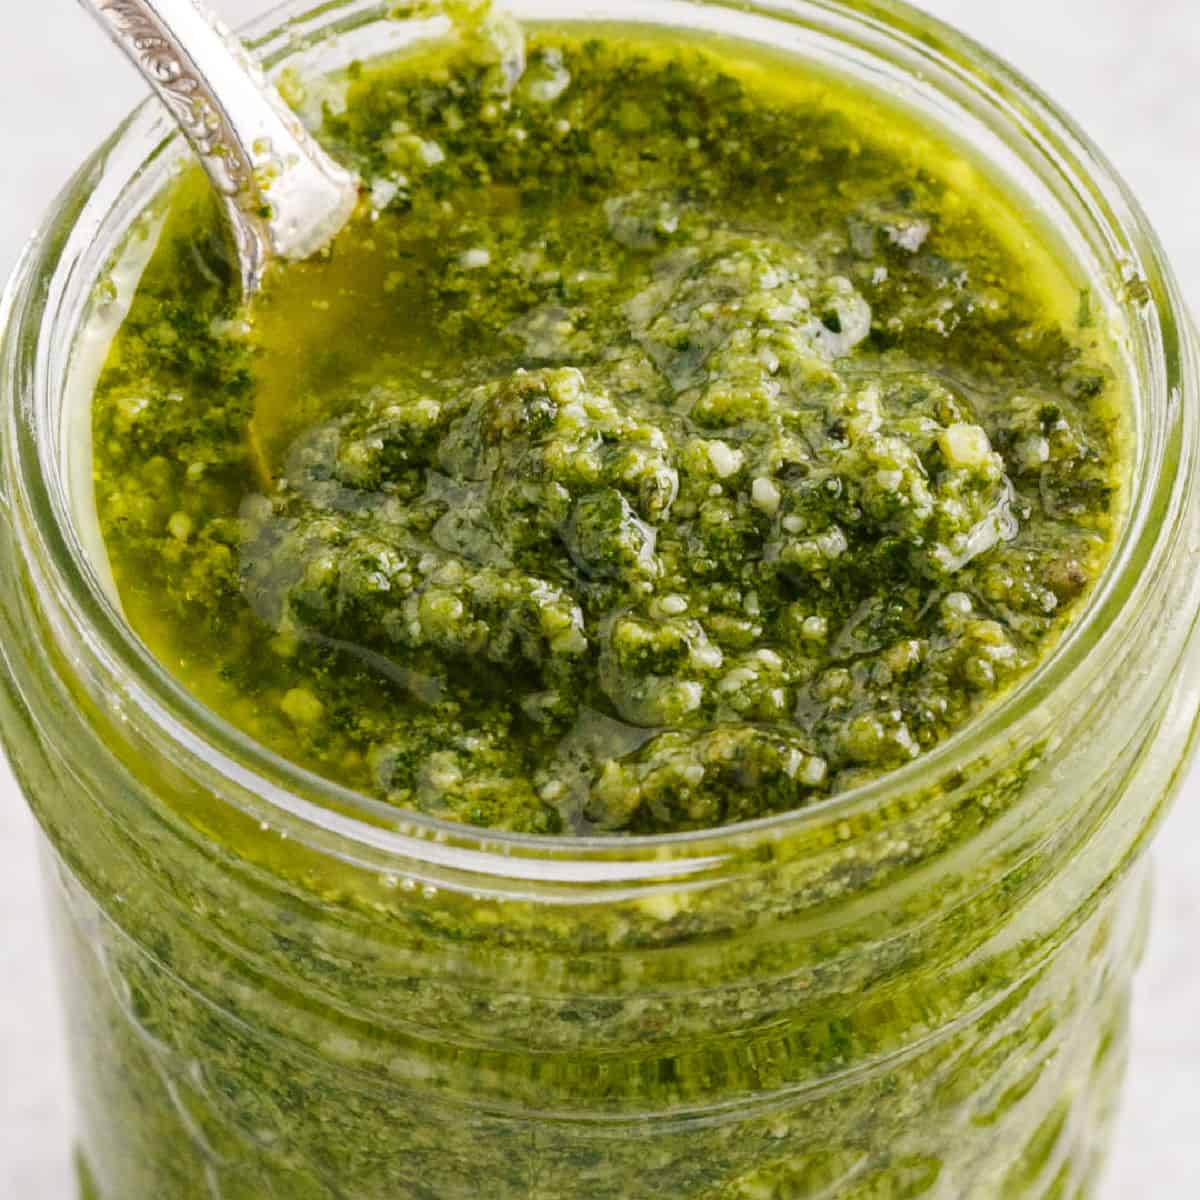 square close up image of homemade pesto sauce in a jar with a spoon